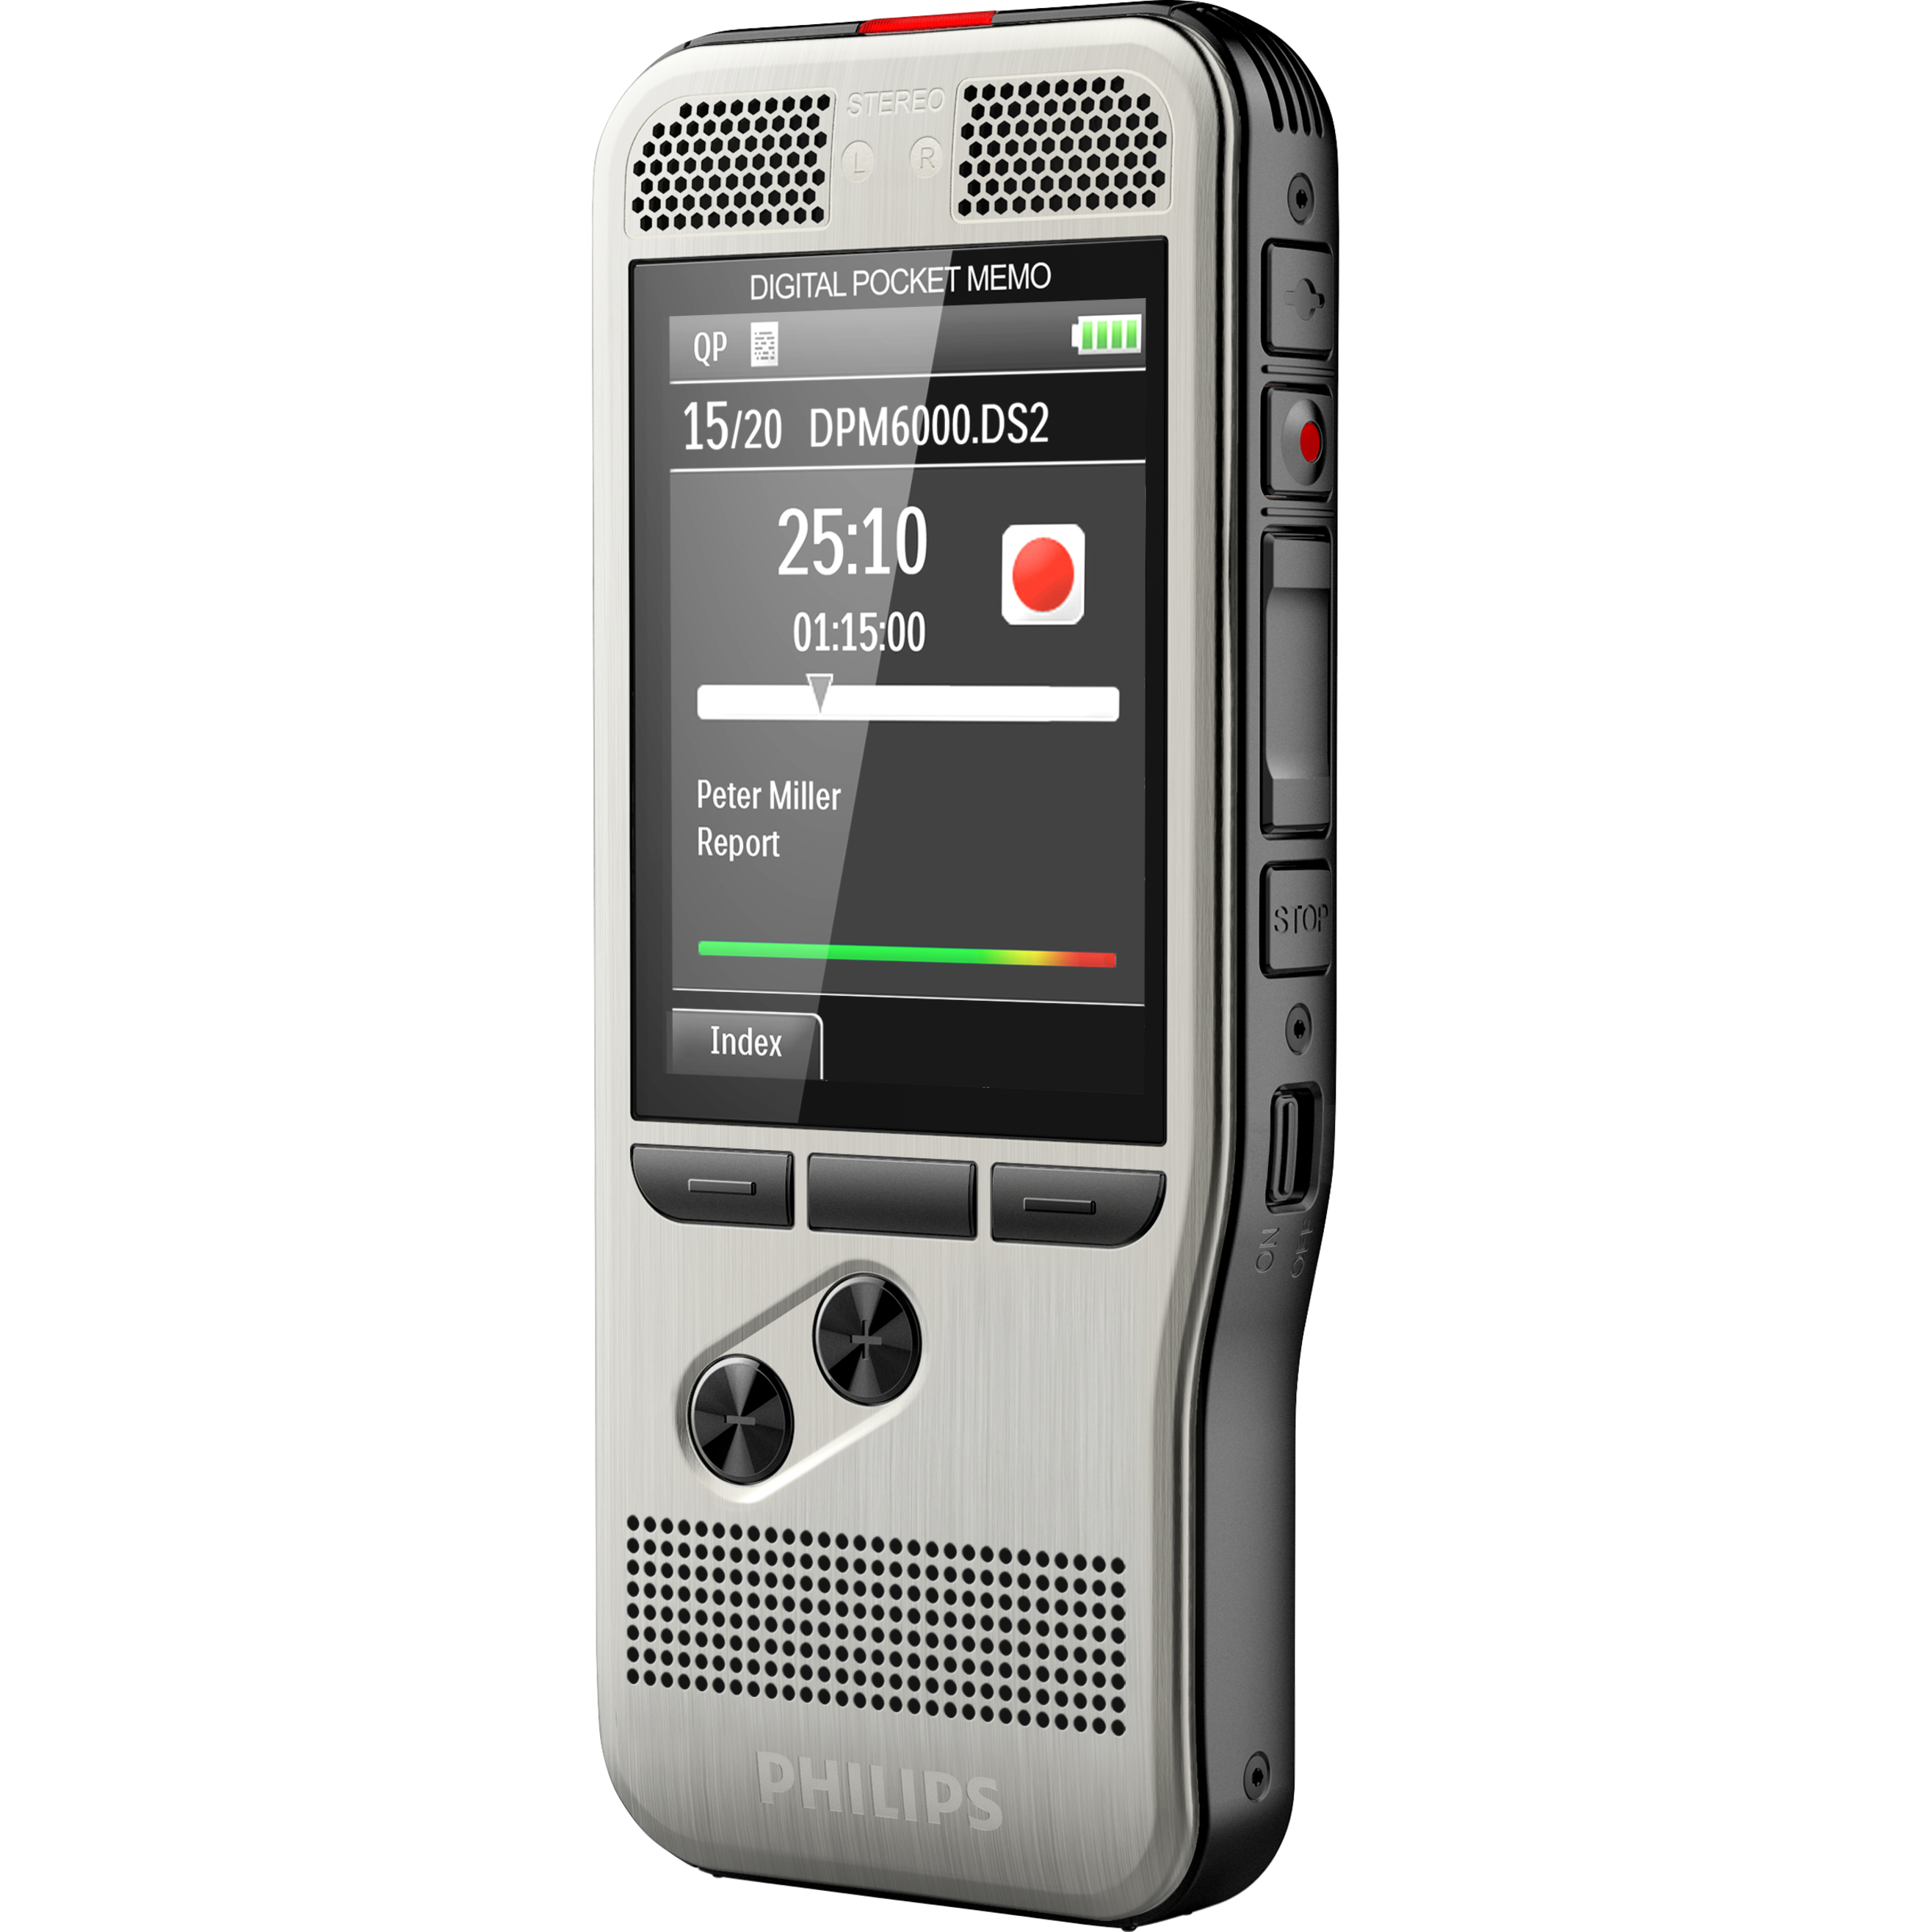 Philips Pocket Memo Digital Voice Recorder with LCD Display, DPM6000 - image 4 of 7